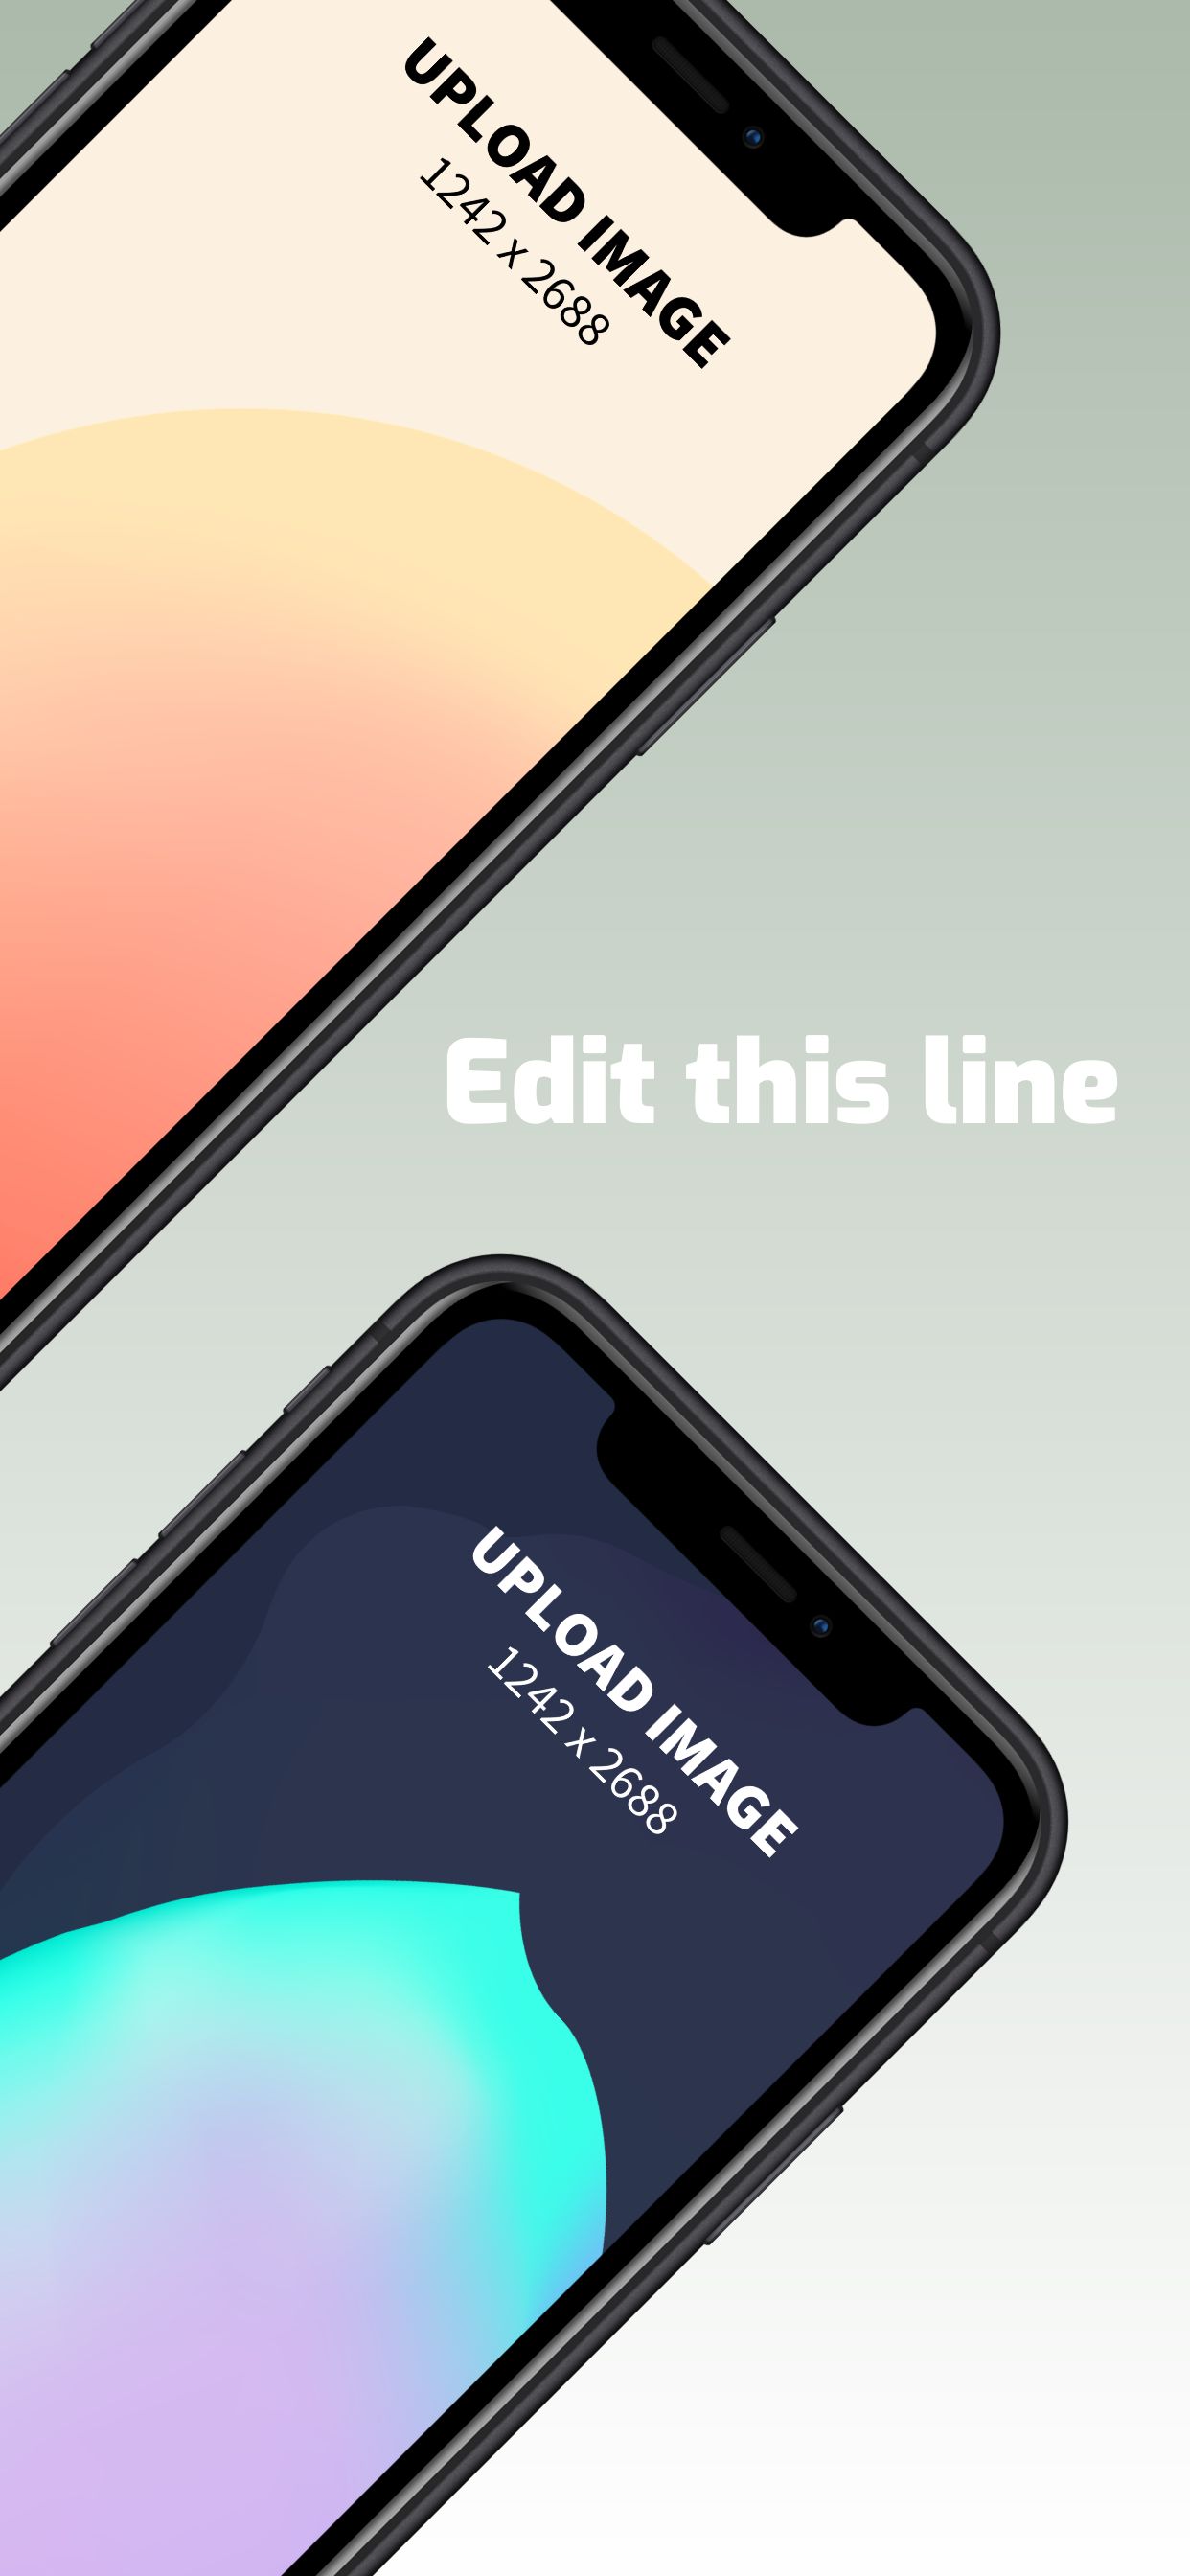 iPhone XS Max Screenshot 13 template. Quickly edit text, colors, images, and more for free.